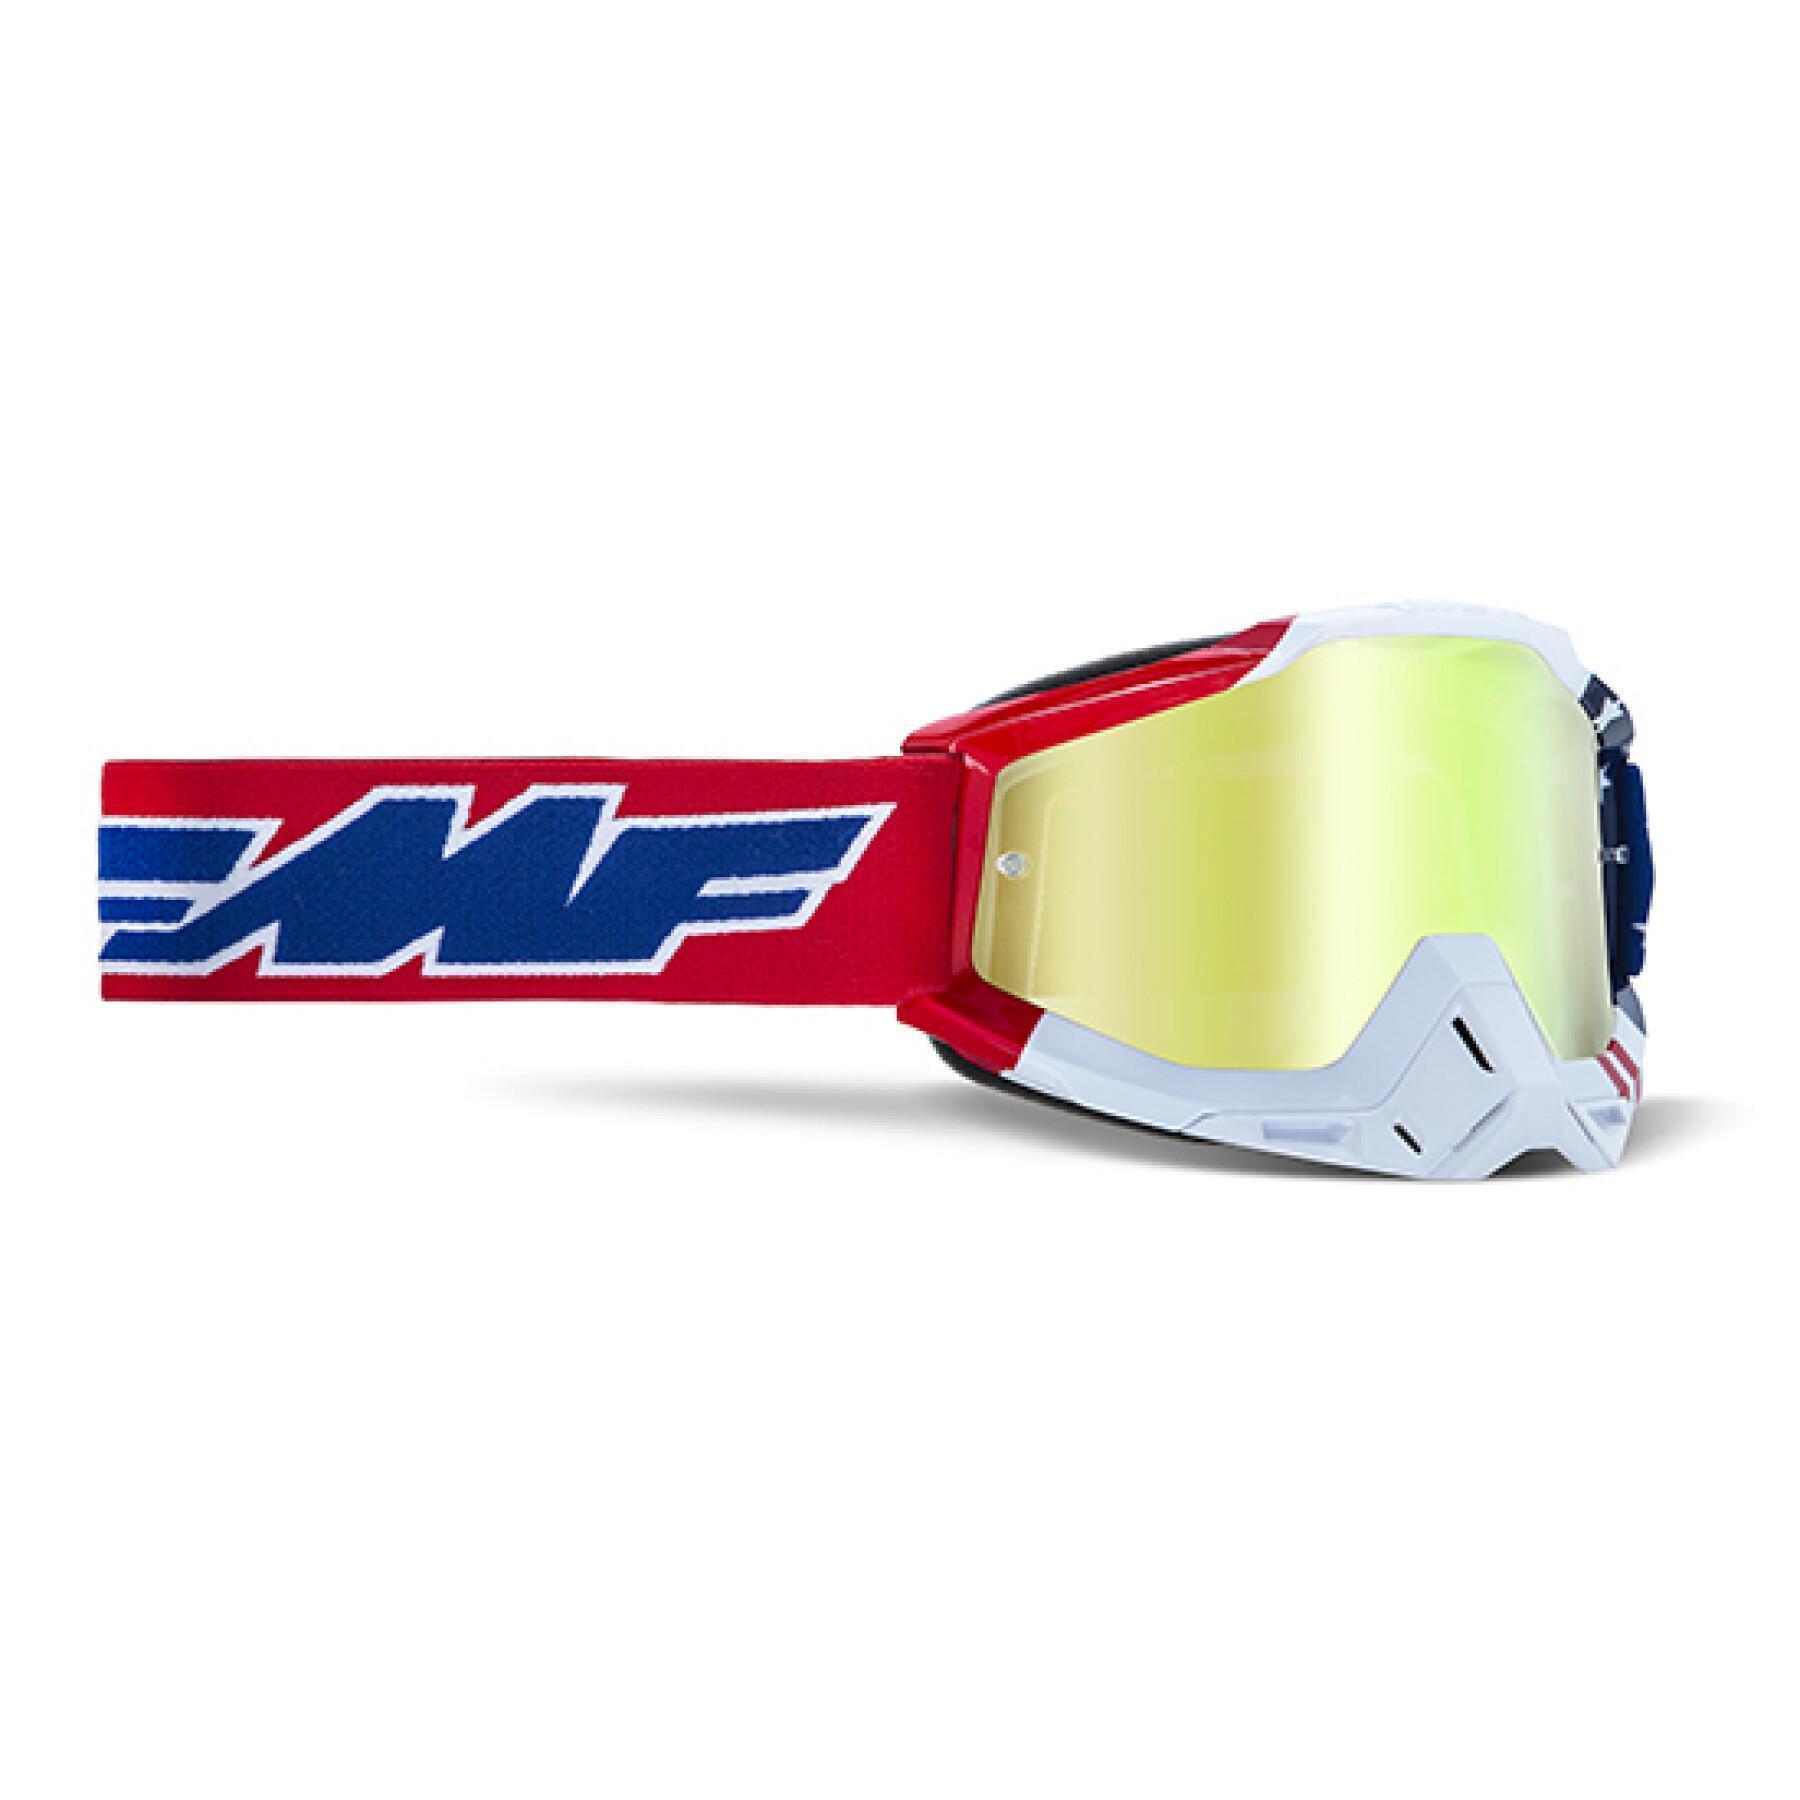 Motorbike cross mask real lens FMF Vision Powerbomb US of A